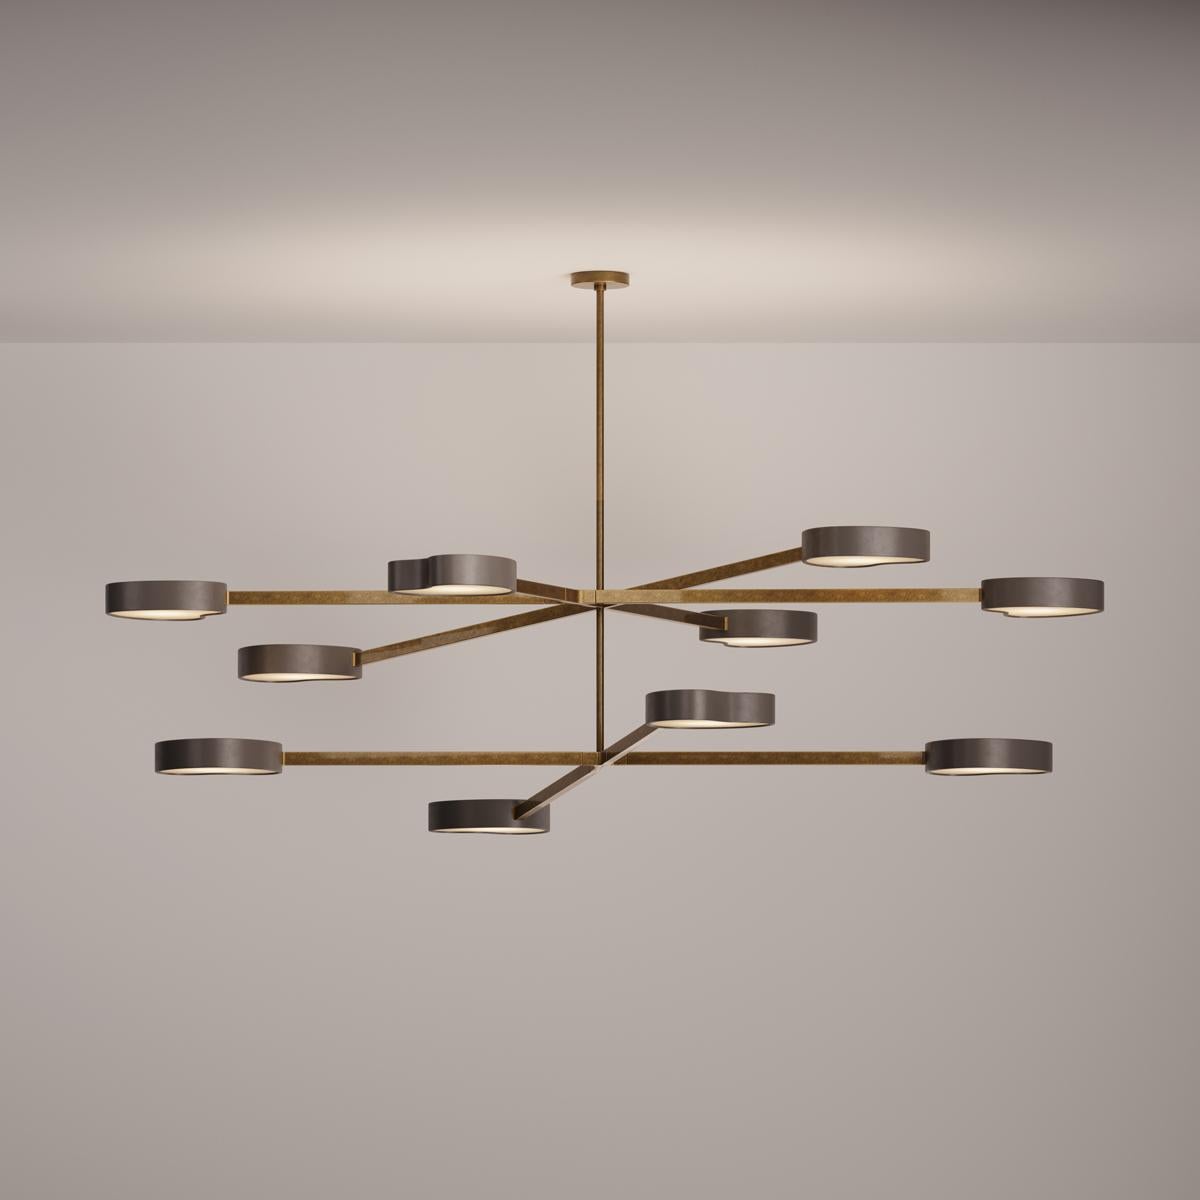 Italian Cuore N.10 Ceiling Light by Gaspare Asaro. Peltro and Bronze Finish For Sale